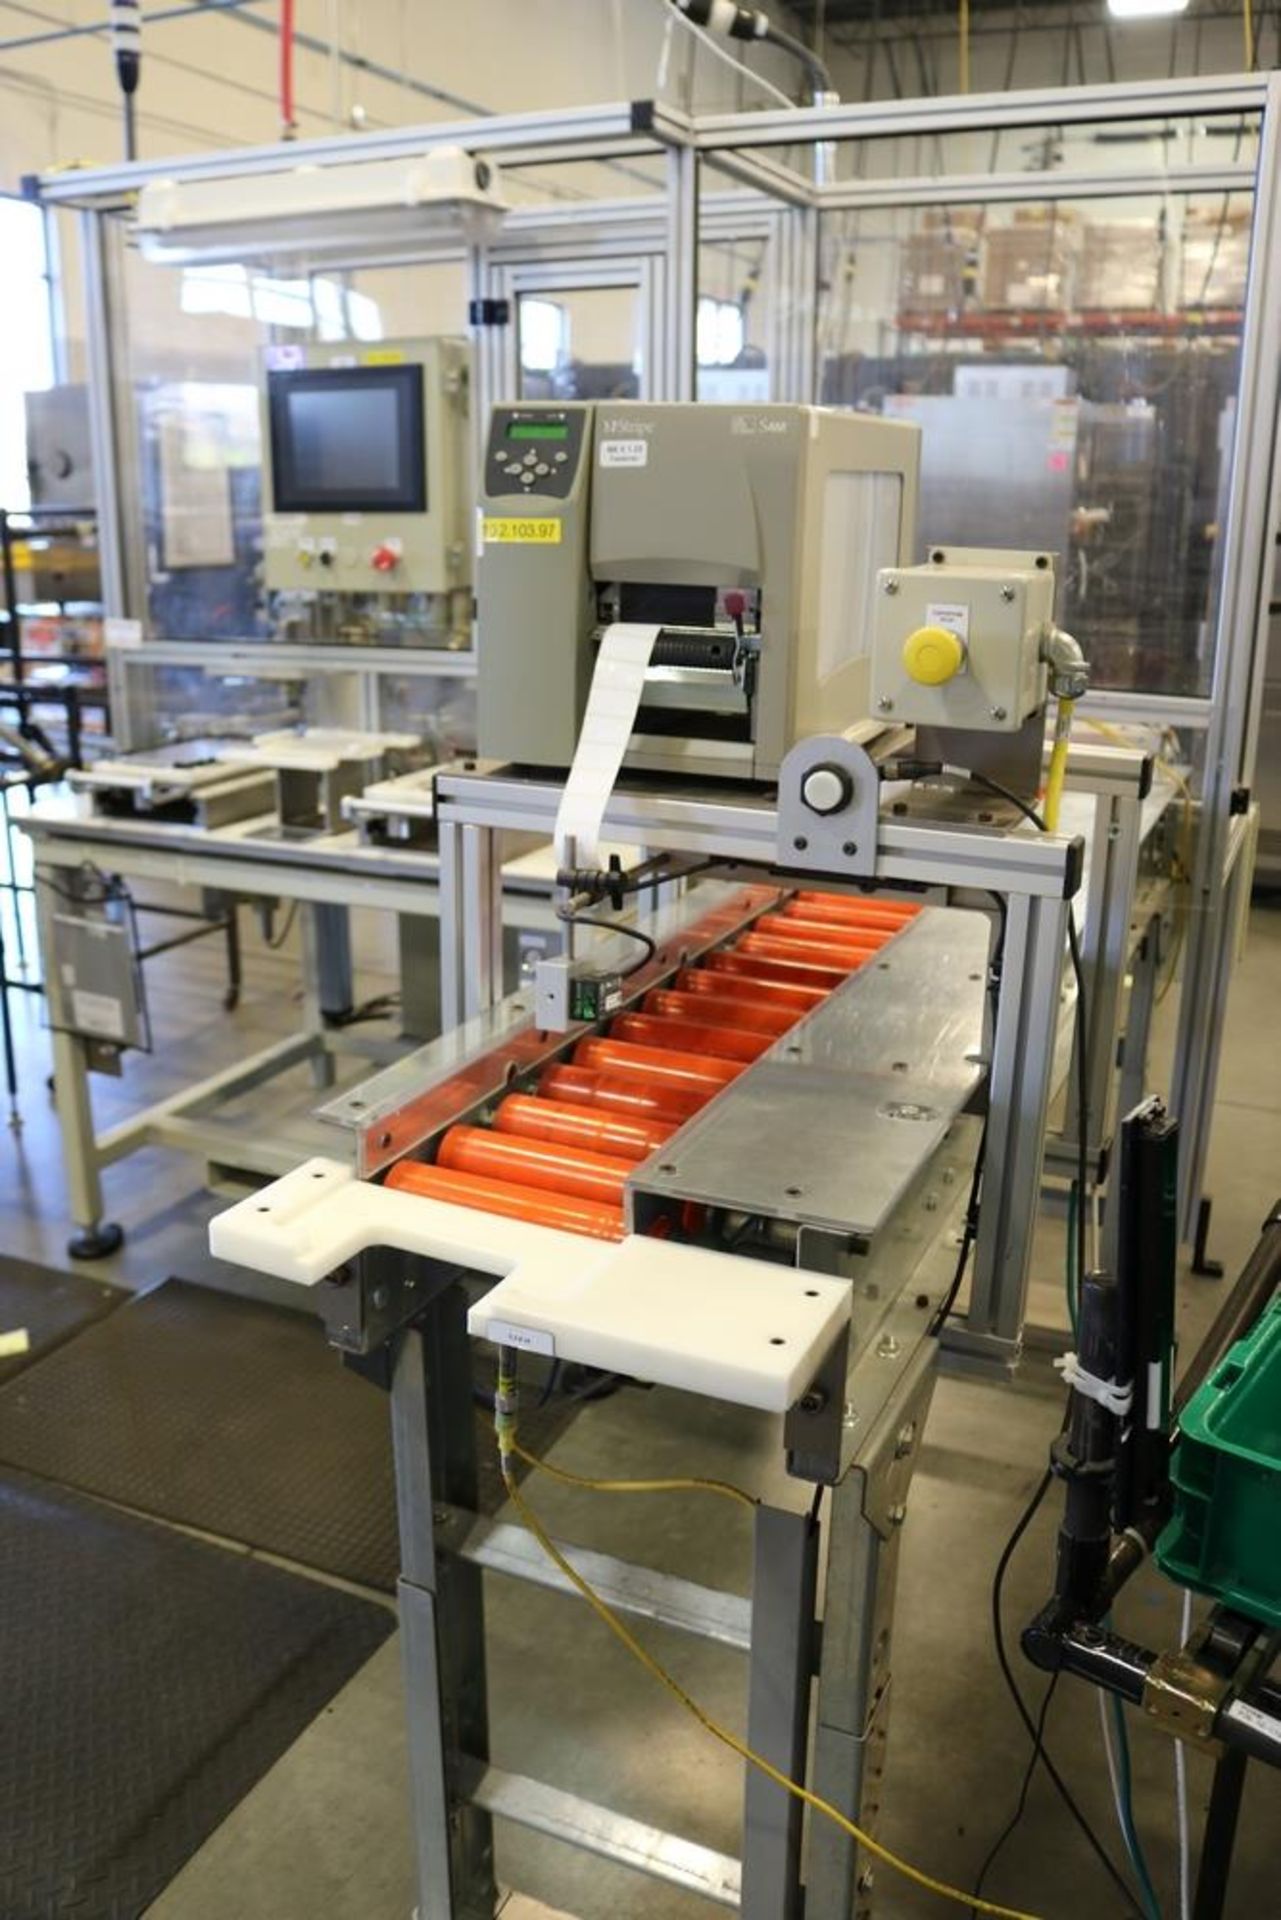 3 Station Automated Module Assembly Line Built by Pro Tech Machine for Enerdel Module Assembly - Image 24 of 48